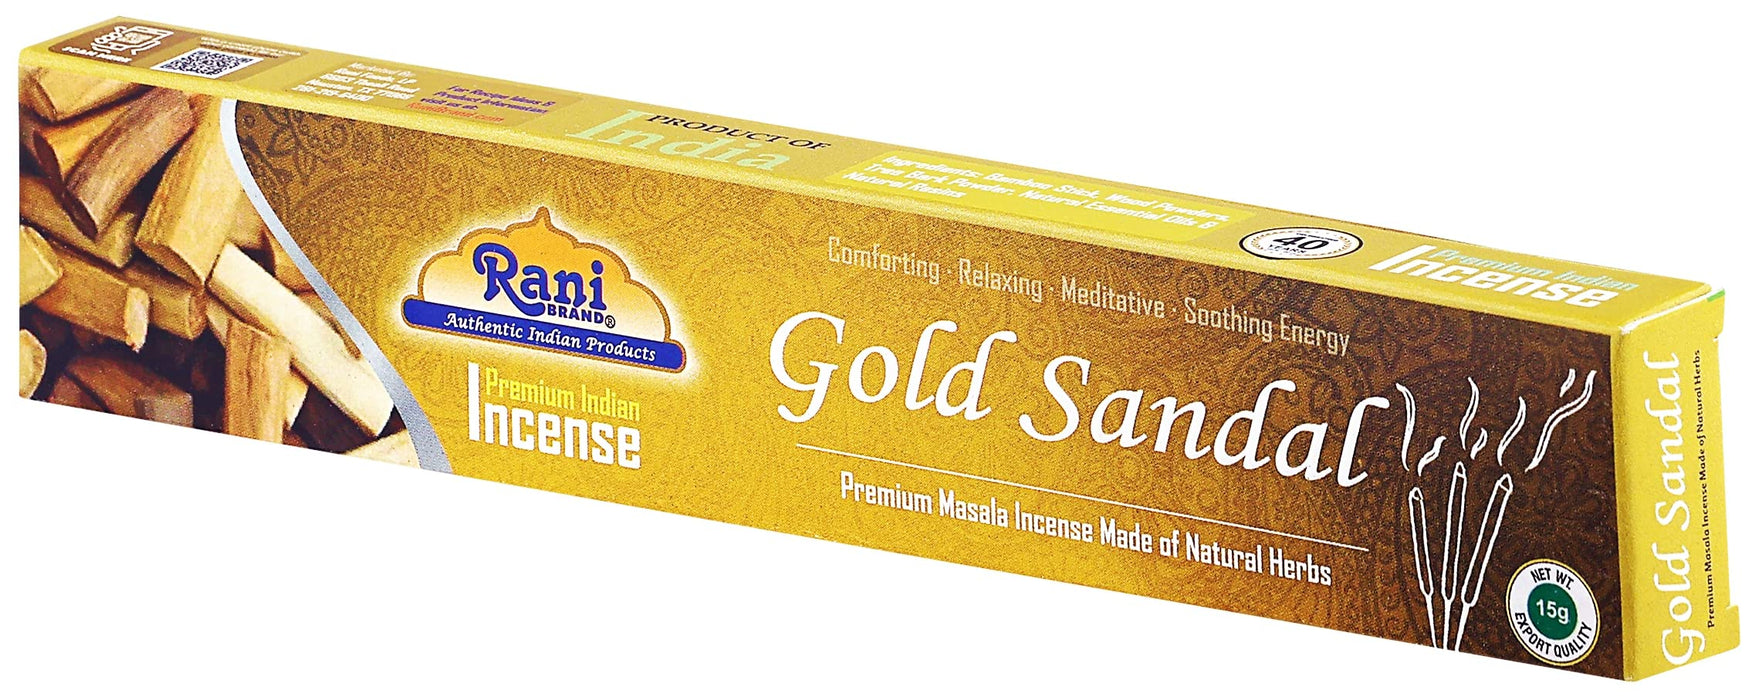 Rani Gold Sandal Incense (Premium Masala Incense Made of Natural Herbs) 15g x 10 Packets ~ Total of 100 Incense sticks | For Puja Purposes | Indian Origin